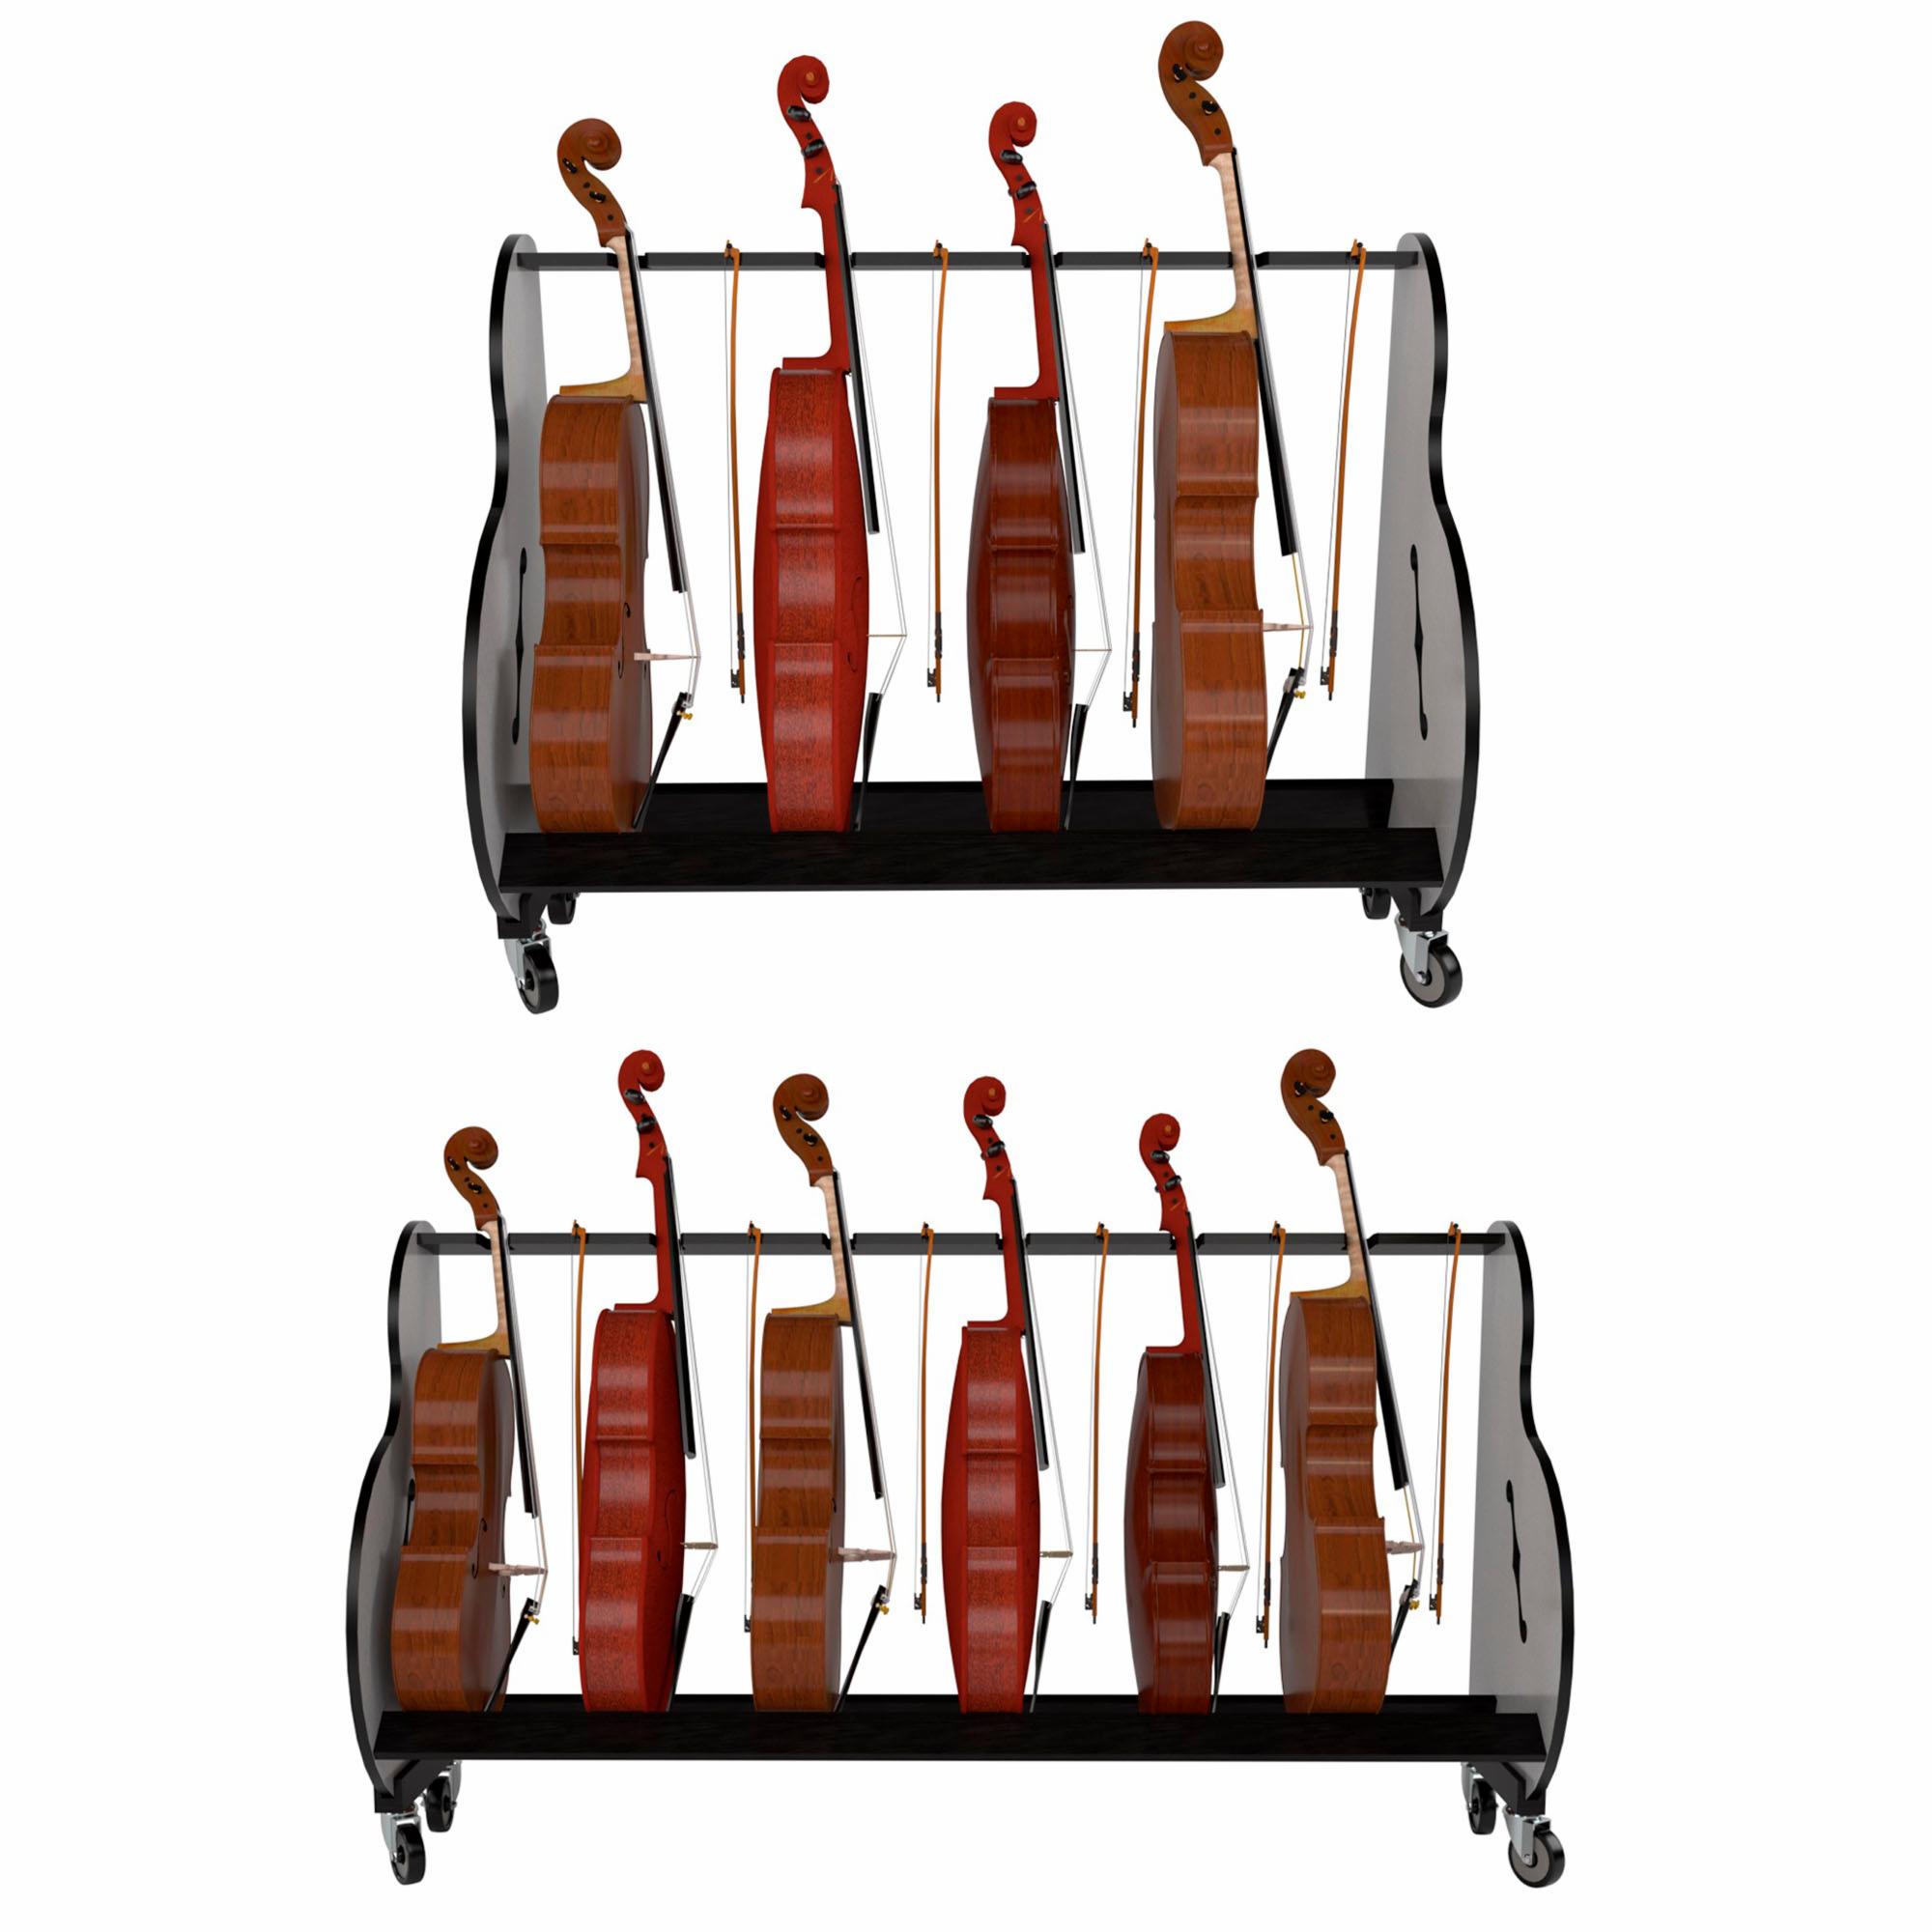 A&S Crafted Products Band Room Cello Rack Instrument Stand